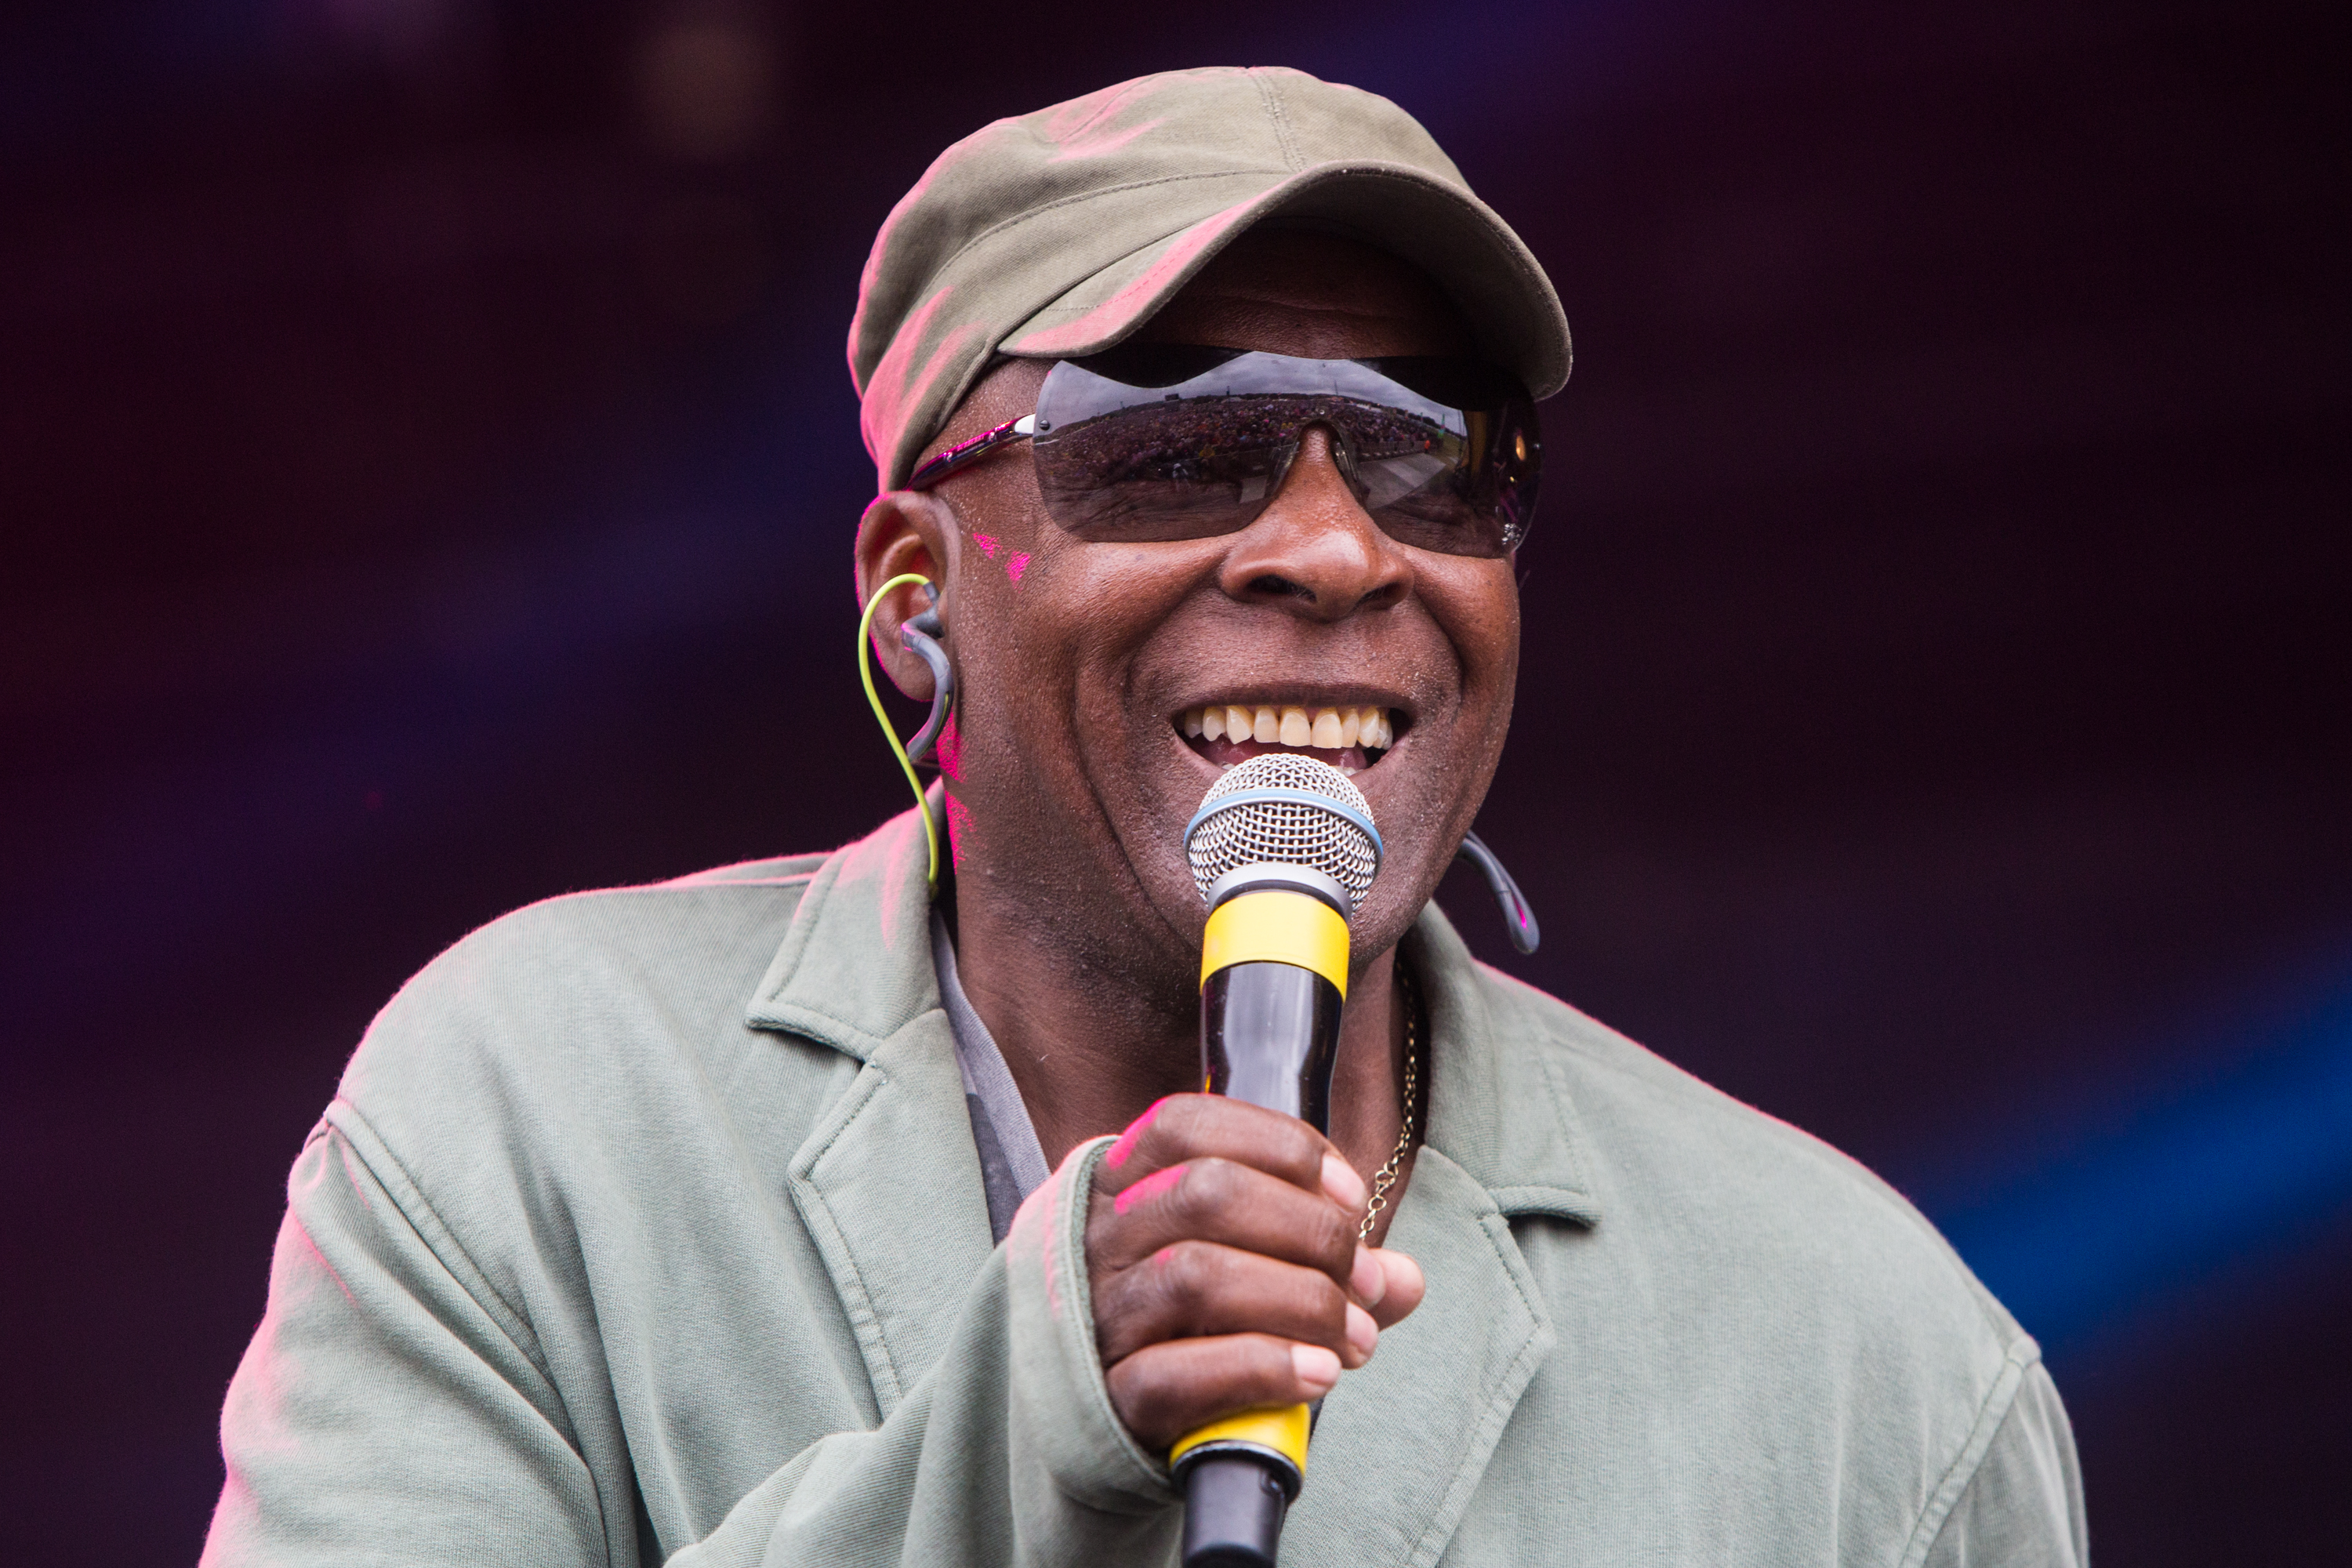 Chris Amoo of The Real Thing performs at Rewind   (Lorne Thomson/Redferns)